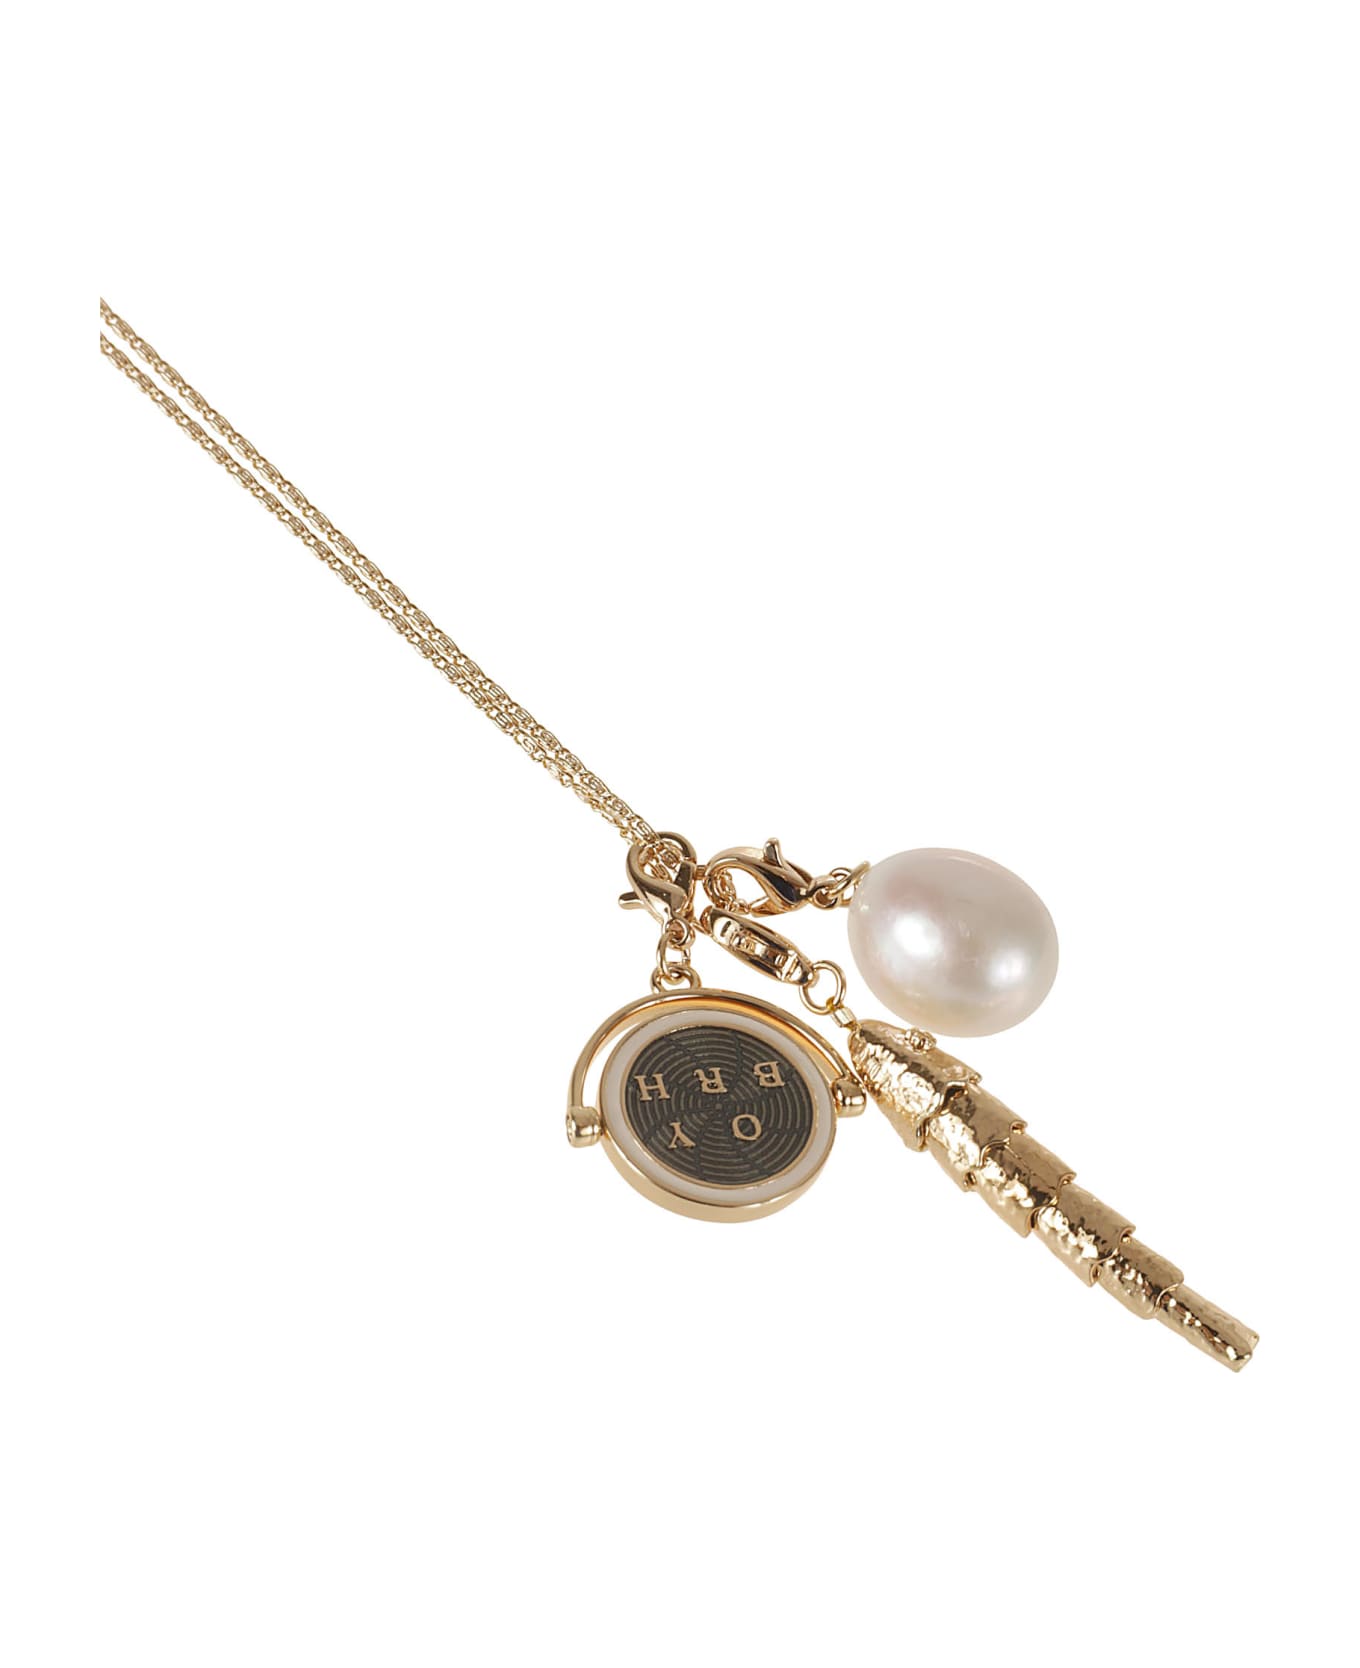 Tory Burch Charm Pendant Necklace - Tory Gold ネックレス